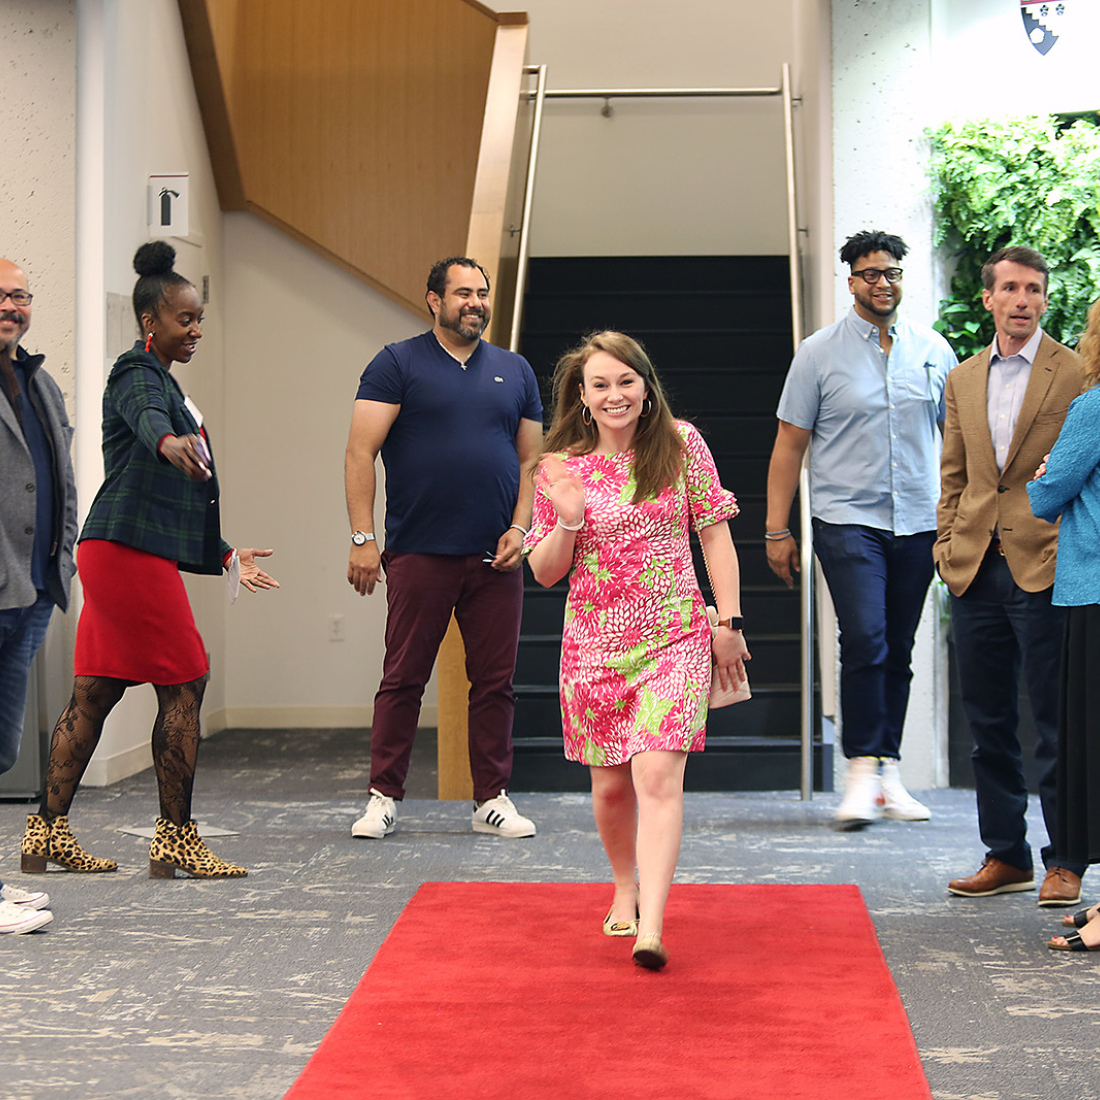 A woman walks down a red carpet in the Gutman Conference Center with the encouragement of her peers